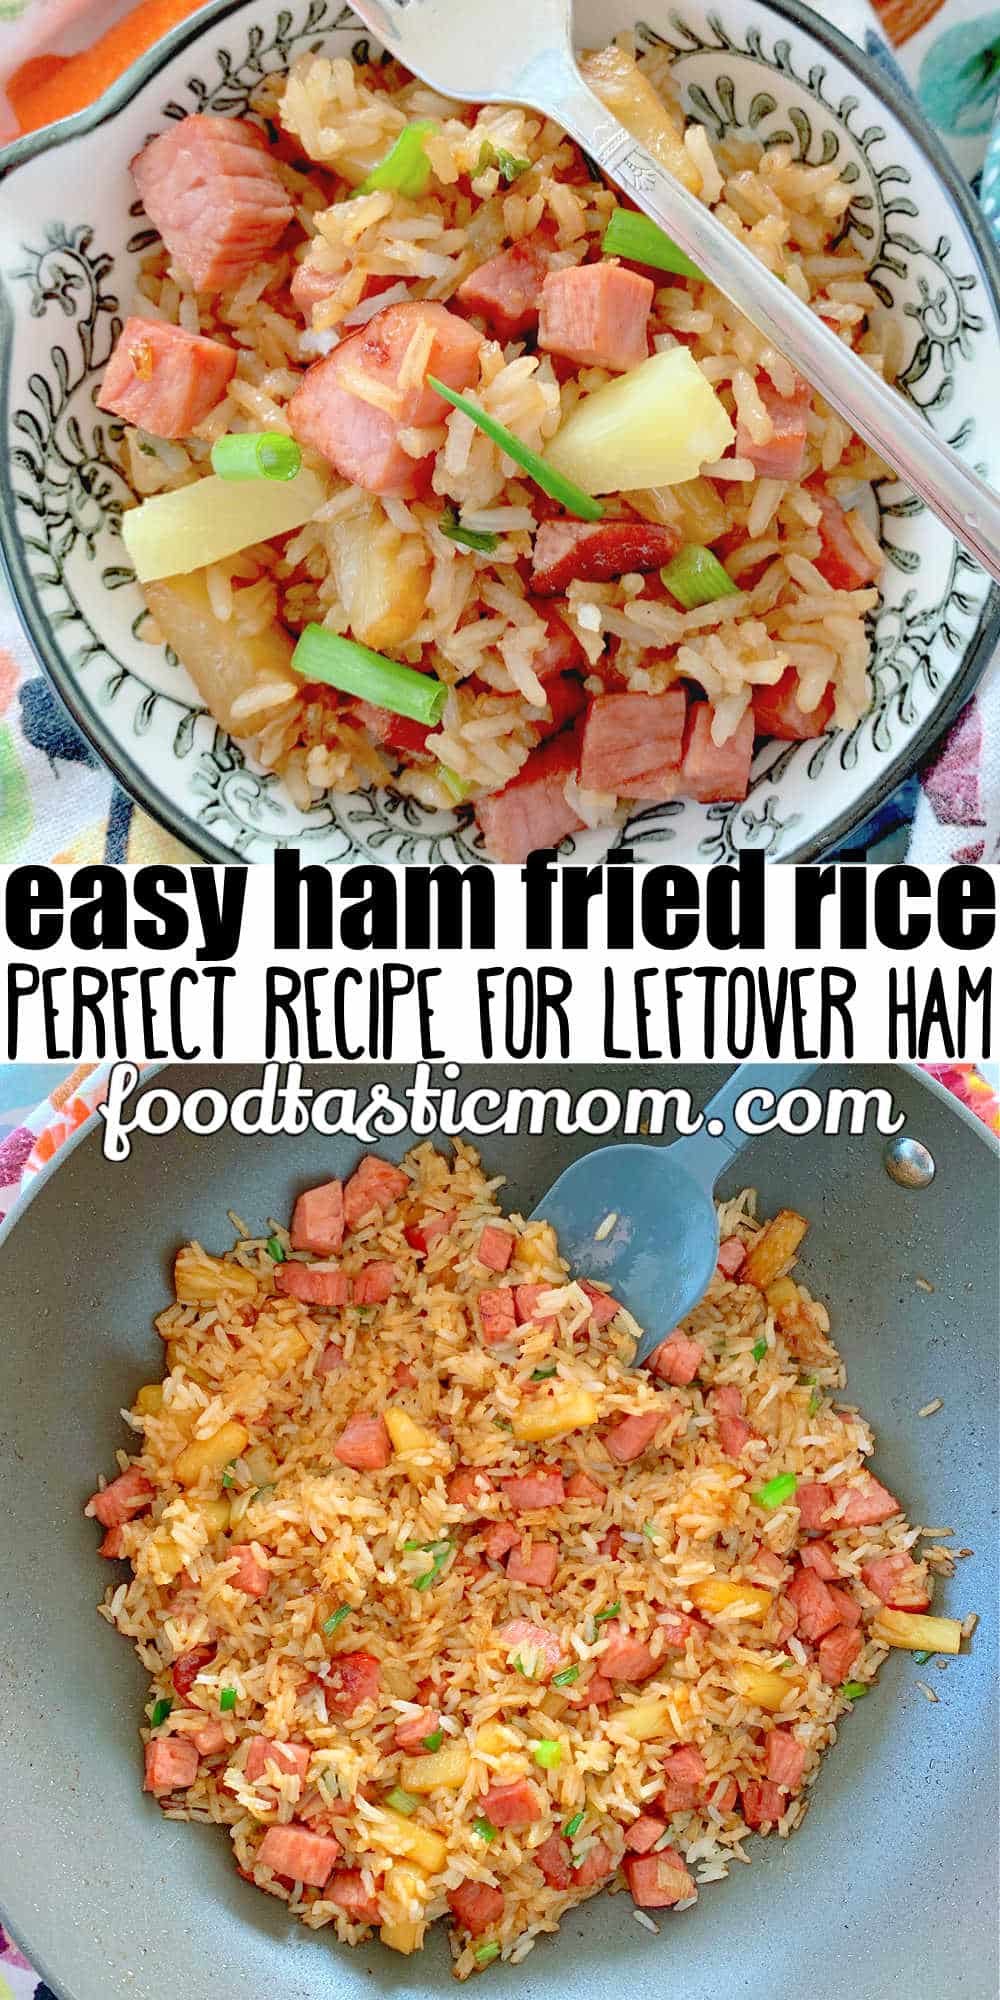 Always have an answer for 'what's for dinner tonight' with this recipe for Easy Fried Rice with Ham and Pineapple. It's a perfect recipe to use up leftover ham! via @foodtasticmom